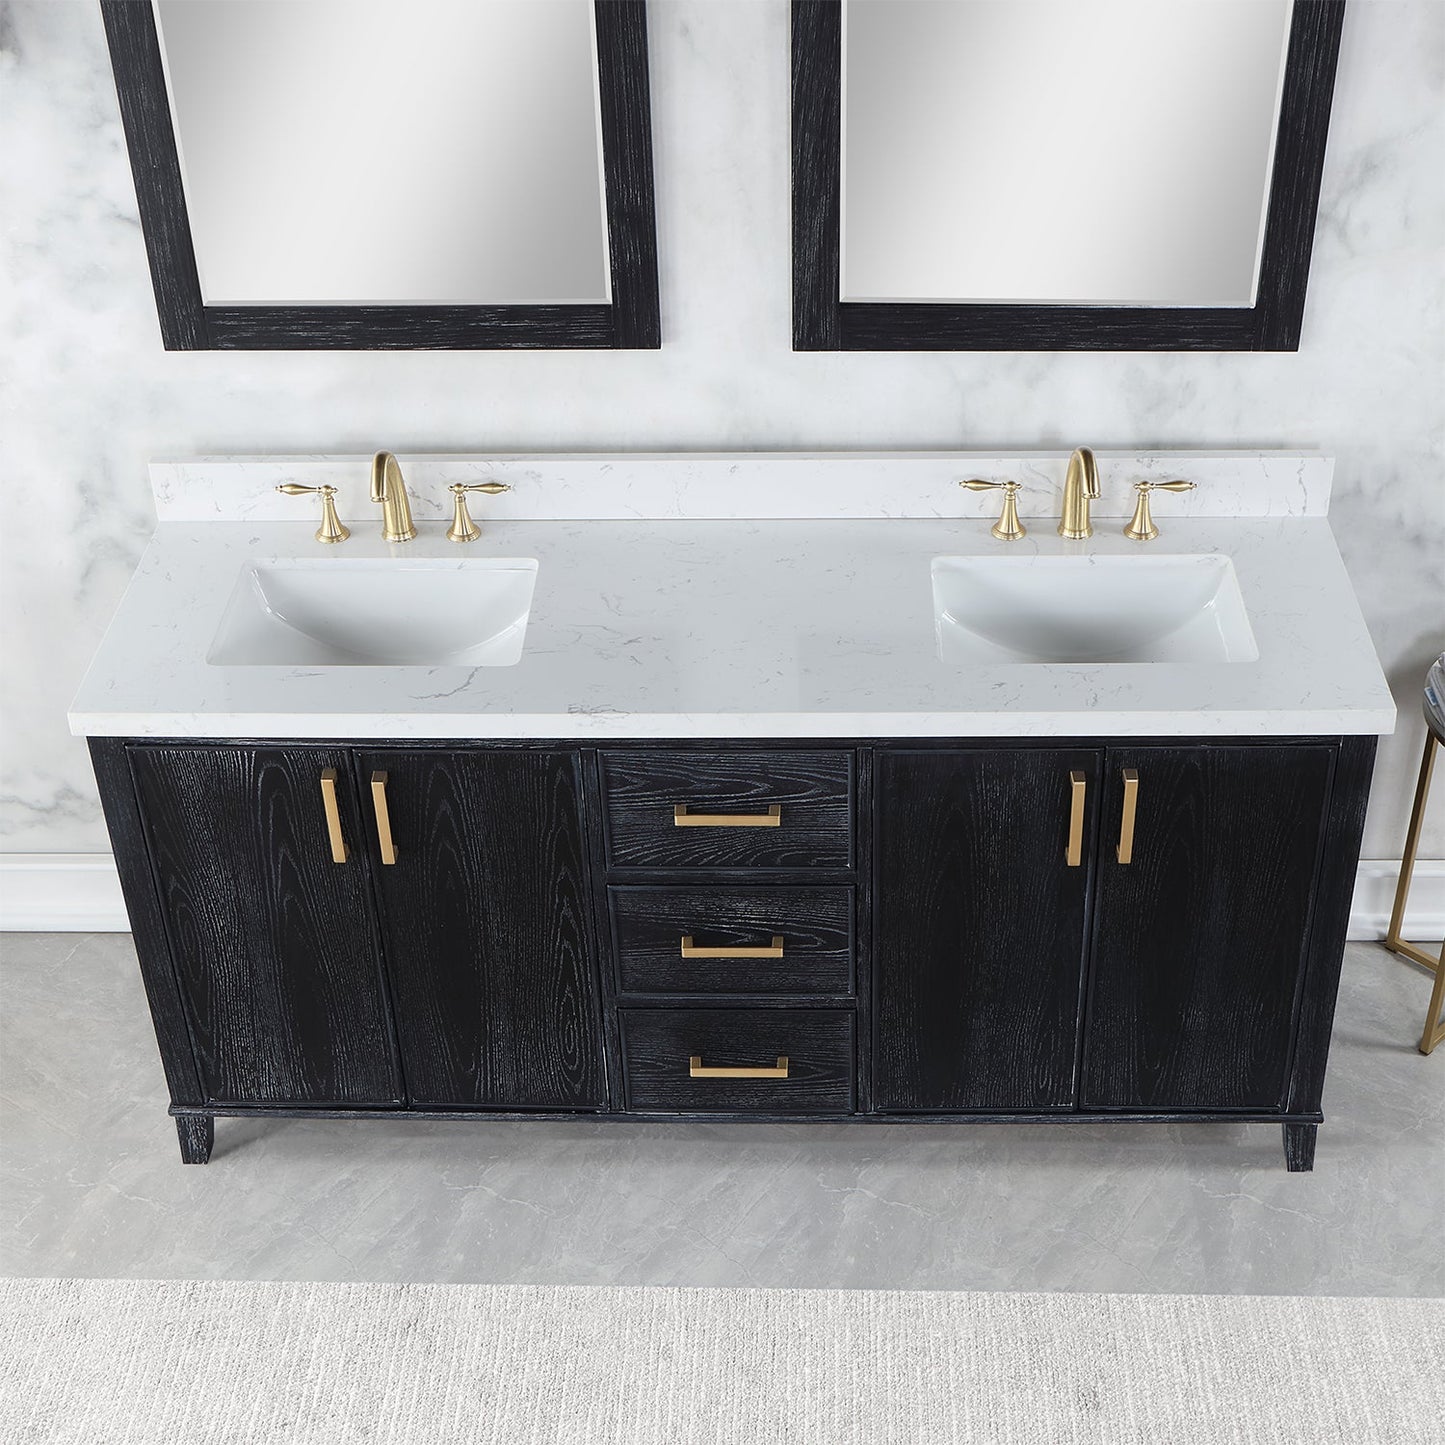 Weiser 72" Double Bathroom Vanity in Black Oak with Aosta White Composite Stone Countertop with Mirror